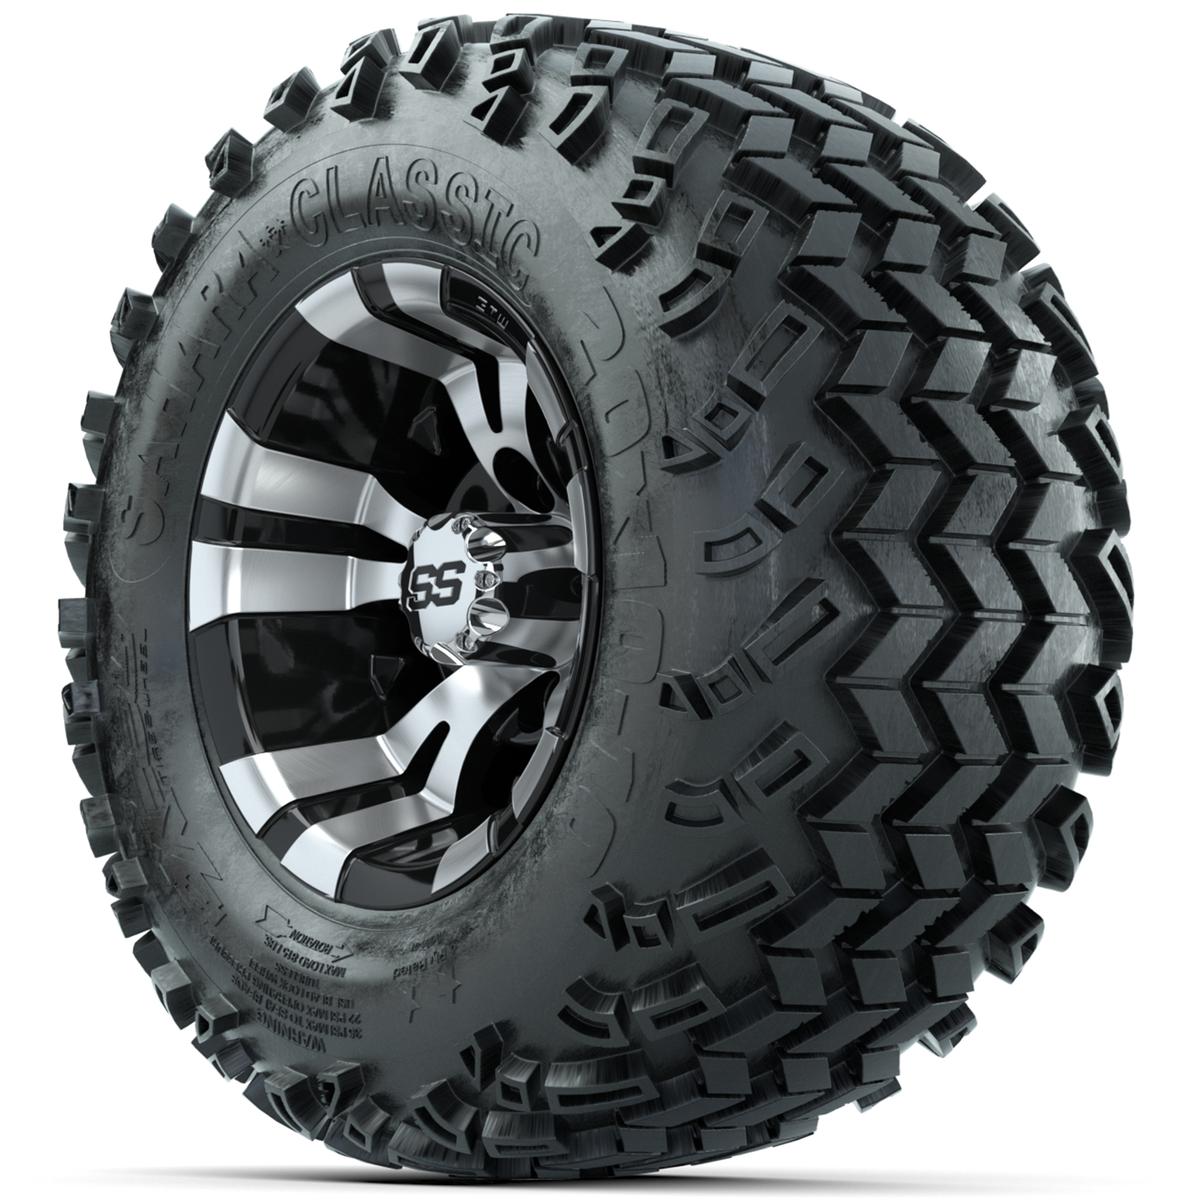 Set of (4) 10 in GTW Storm Trooper Wheels with 20x10-10 Sahara Classic All Terrain Tires